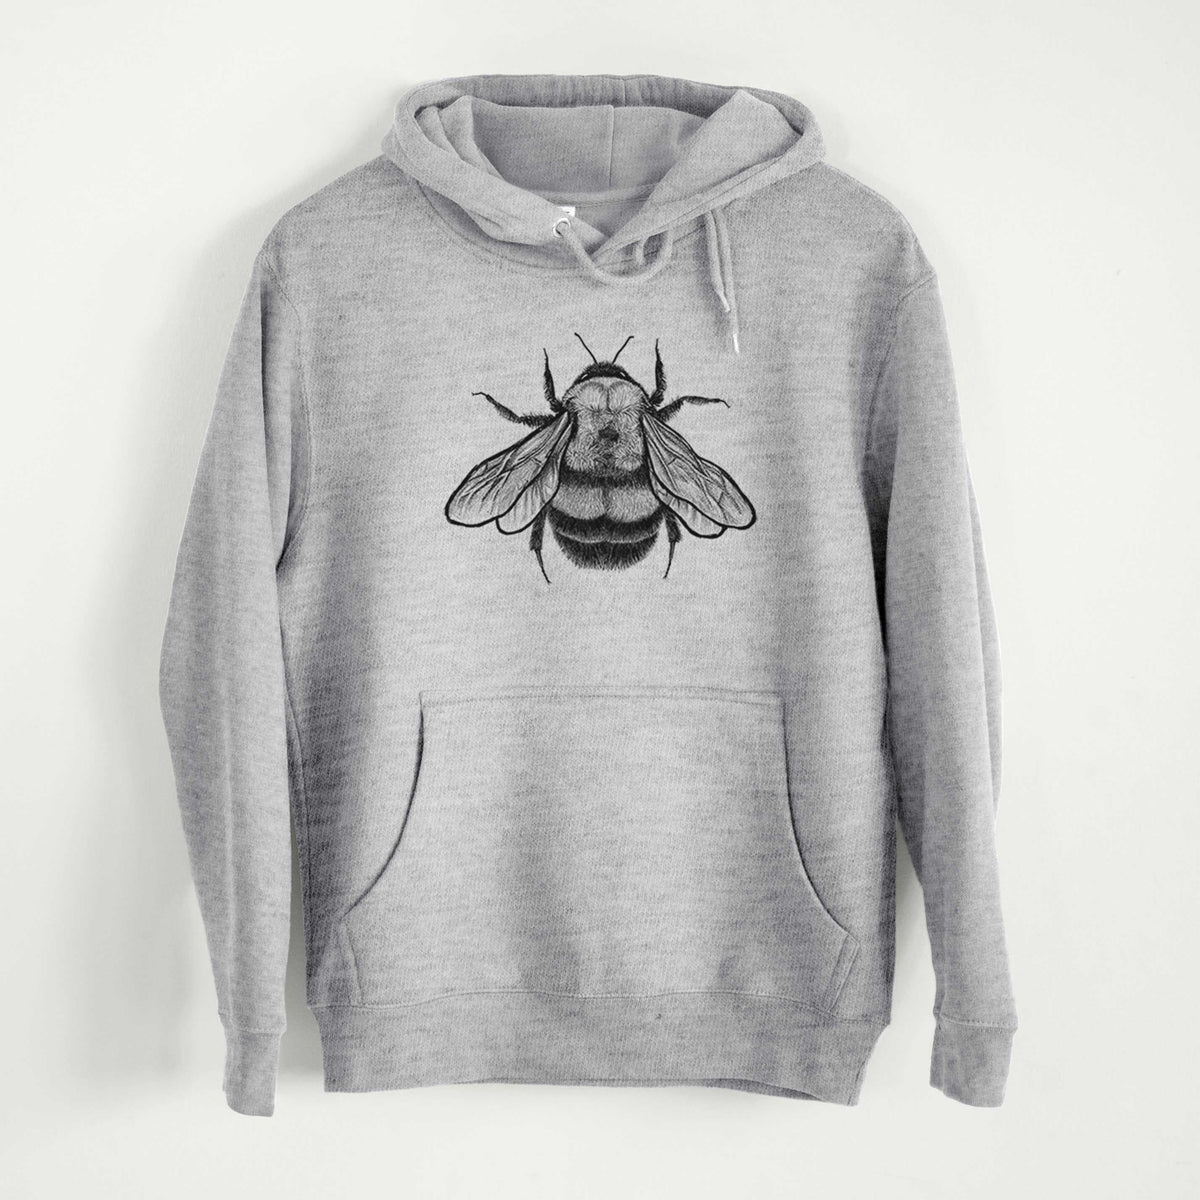 Bombus Affinis - Rusty-Patched Bumble Bee  - Mid-Weight Unisex Premium Blend Hoodie